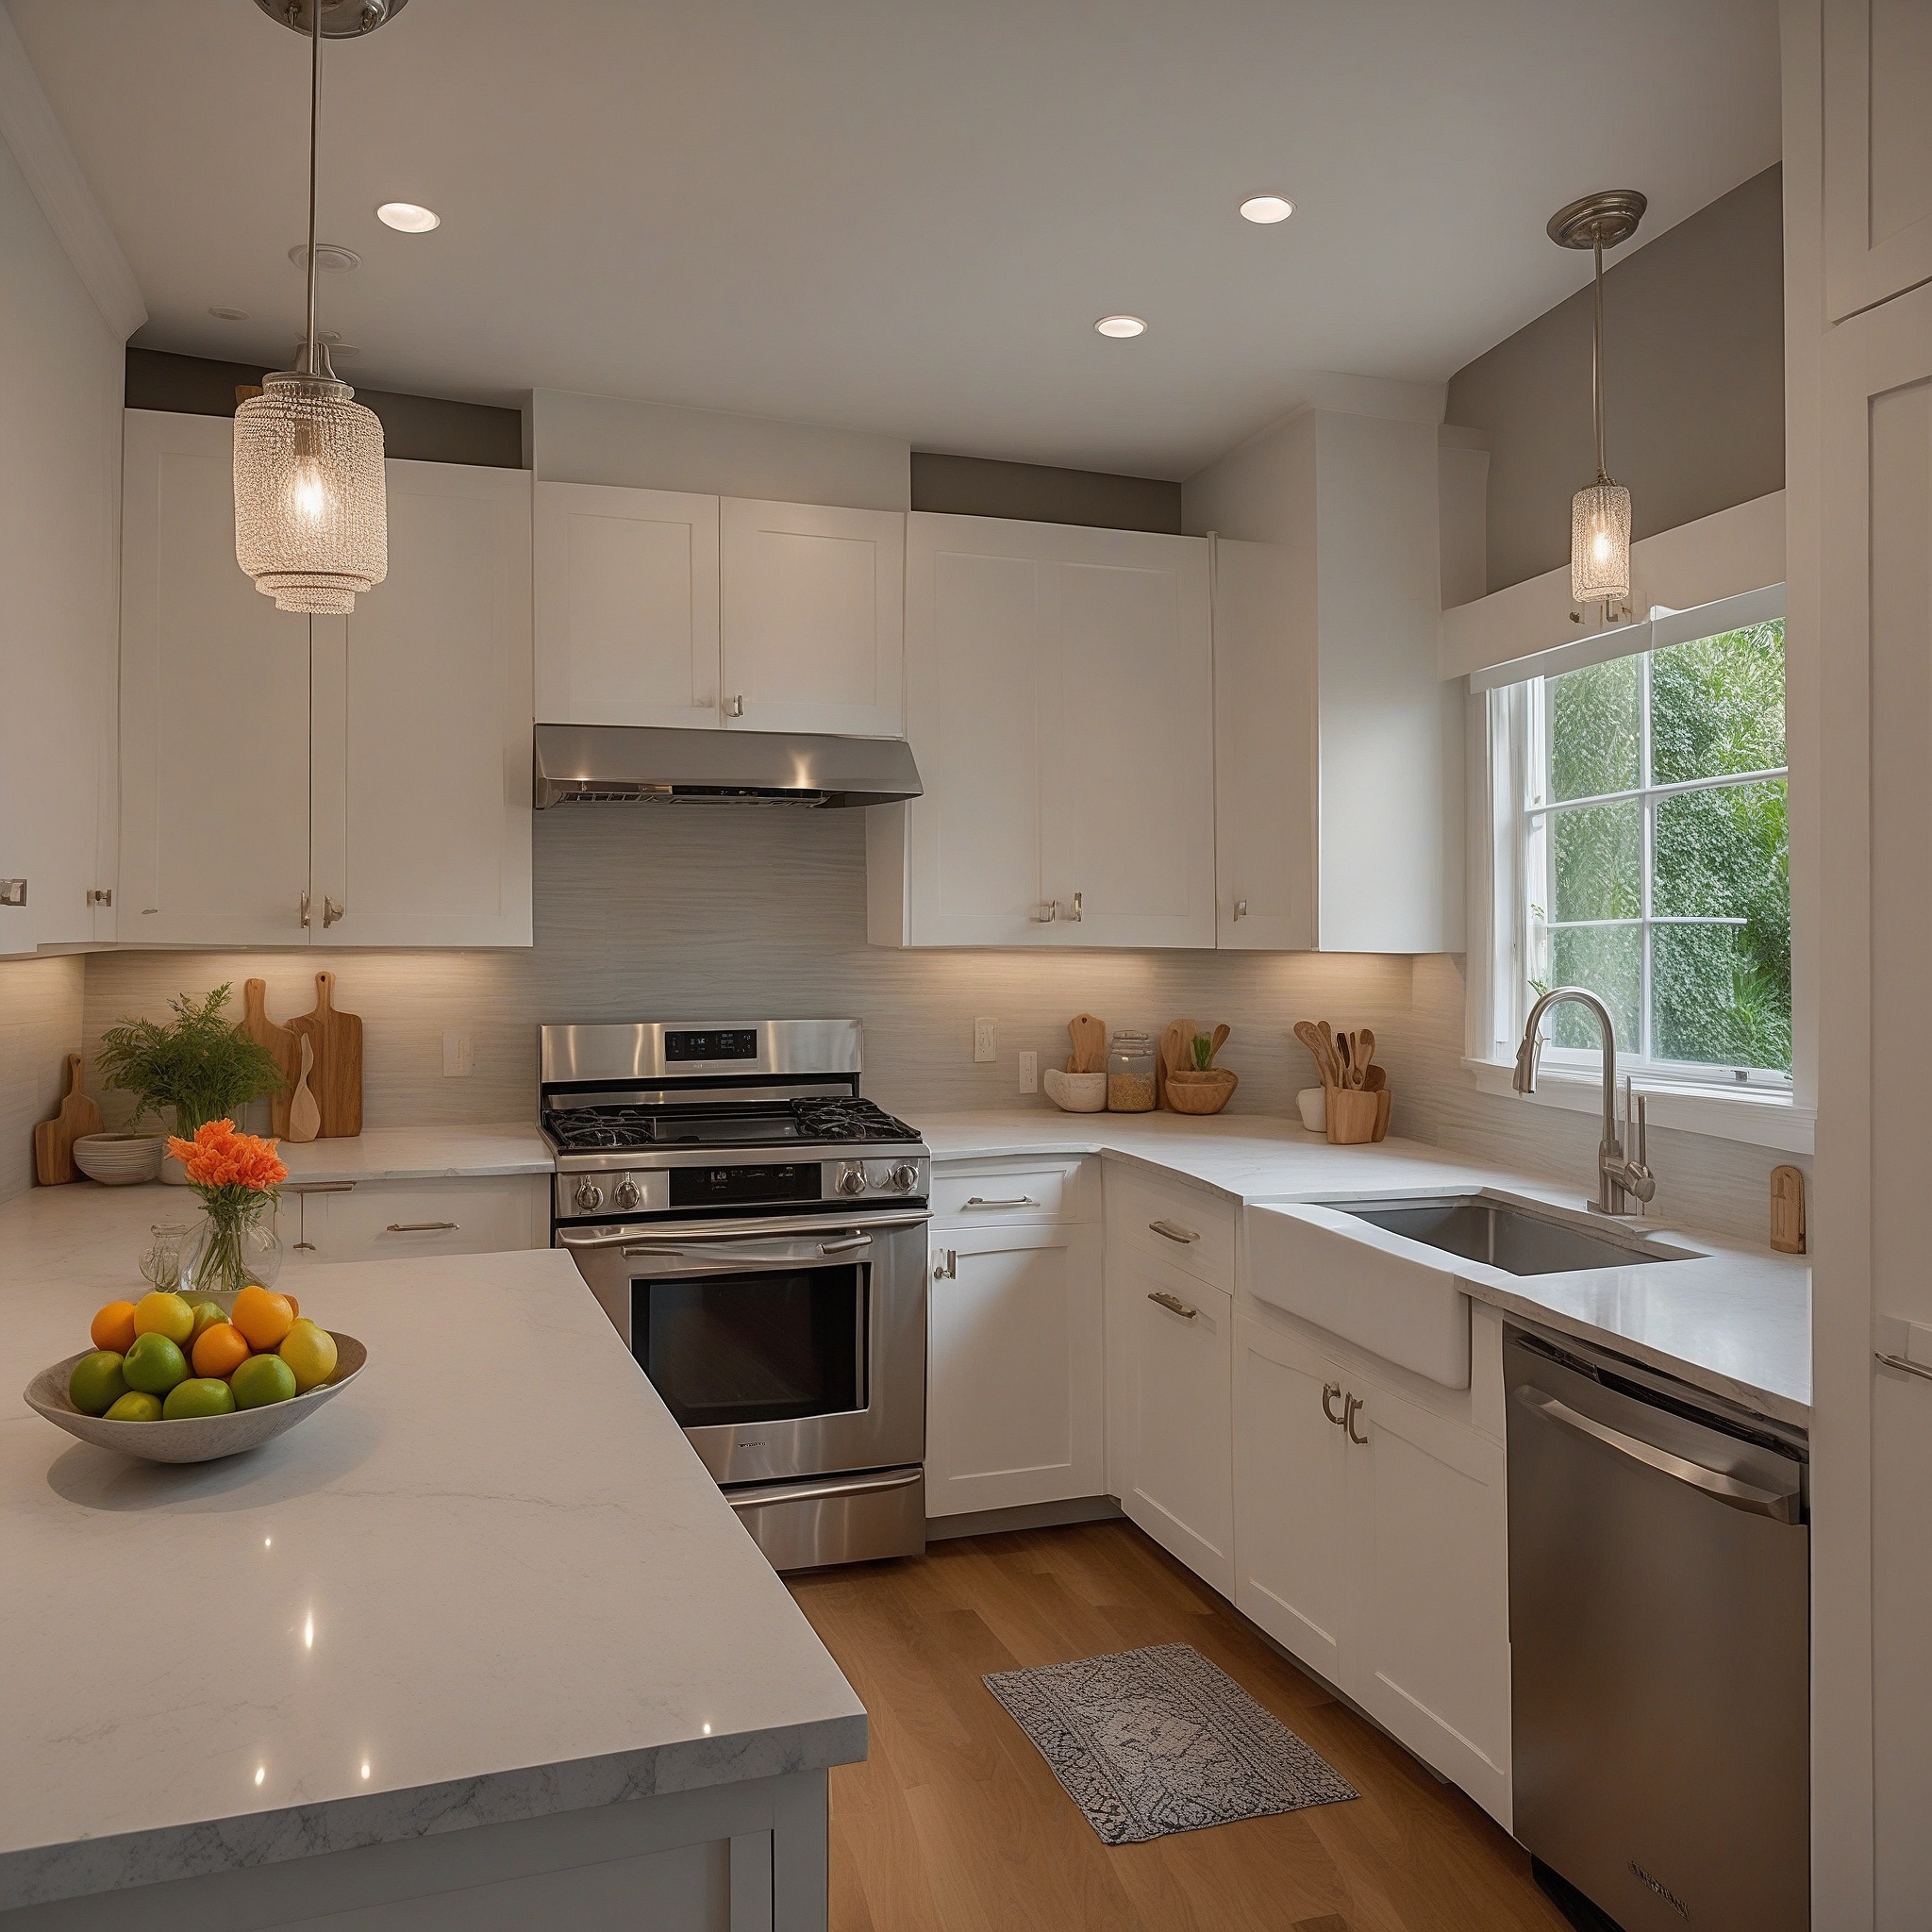 Transitional Apartment Kitchen Layout with a Clend of Traditional and Contemporary Elements